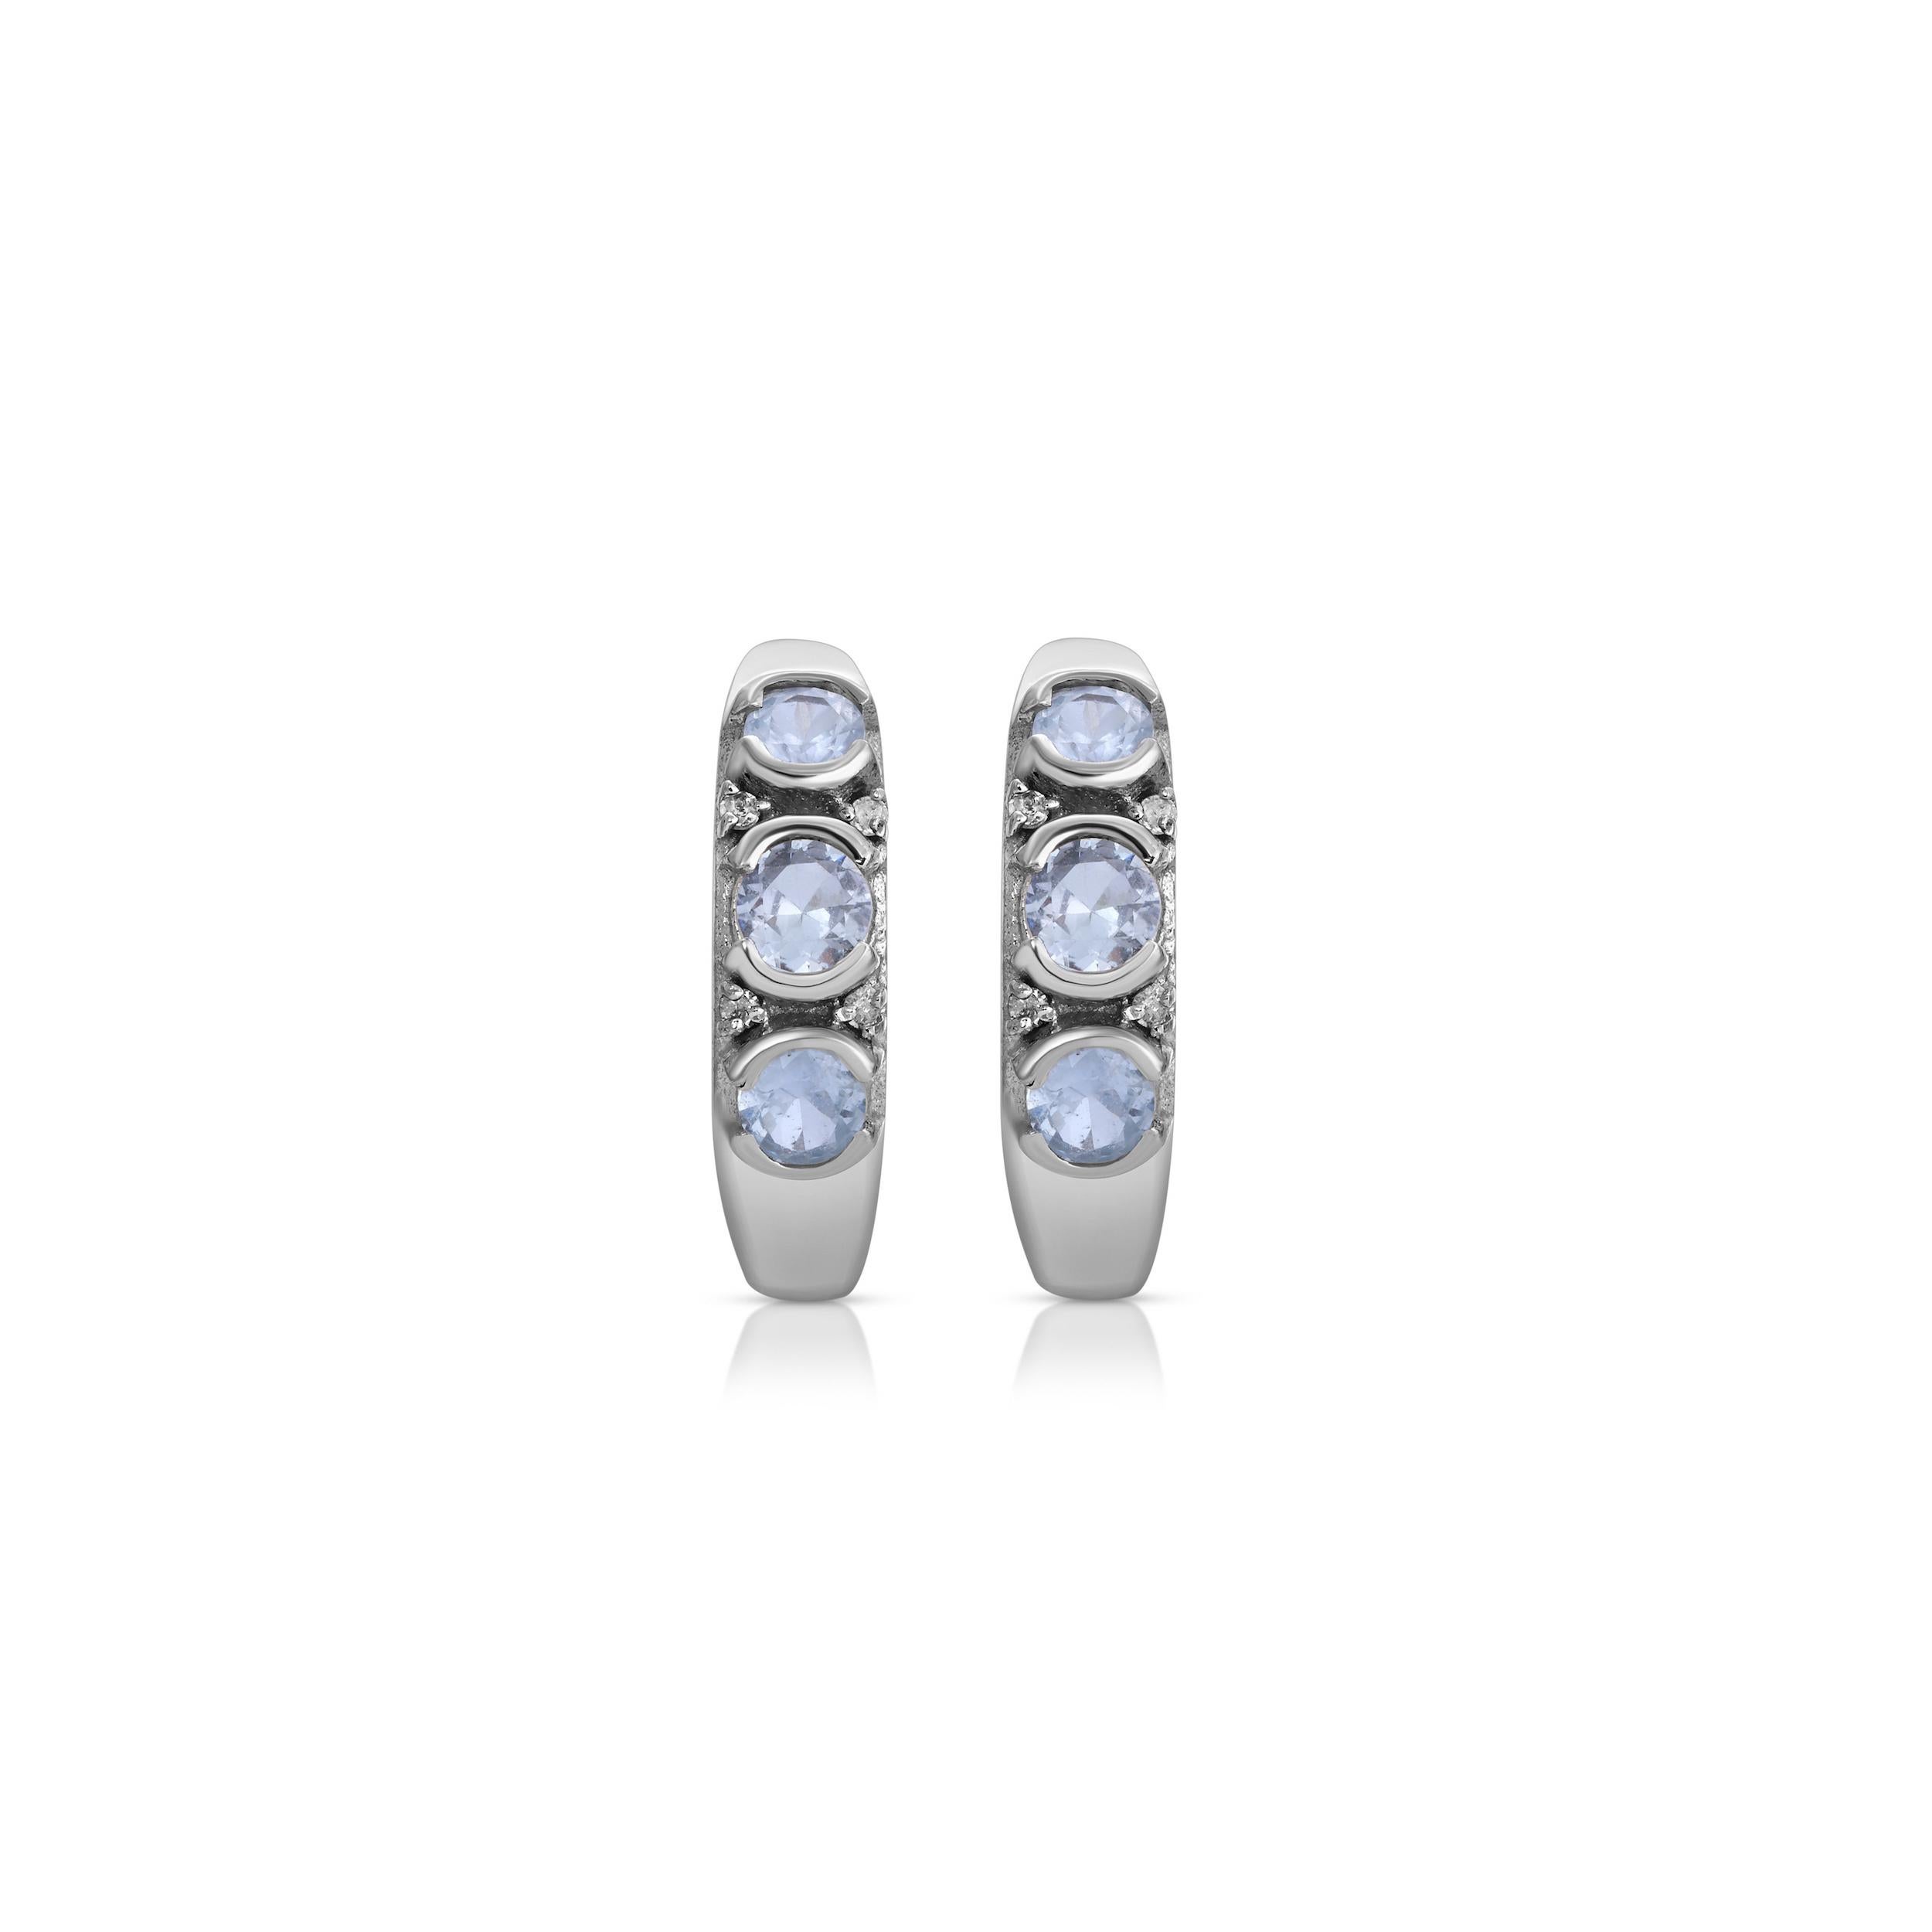 Beautiful hoop earrings in a contemporary design with a glamorous 1980's edge. These earrings feature 2.15 Carats of chunky, triple set ice blue Sapphires enhanced with .02 Carats of Brilliant Cut White Diamonds. These hoops are set in stylish 18